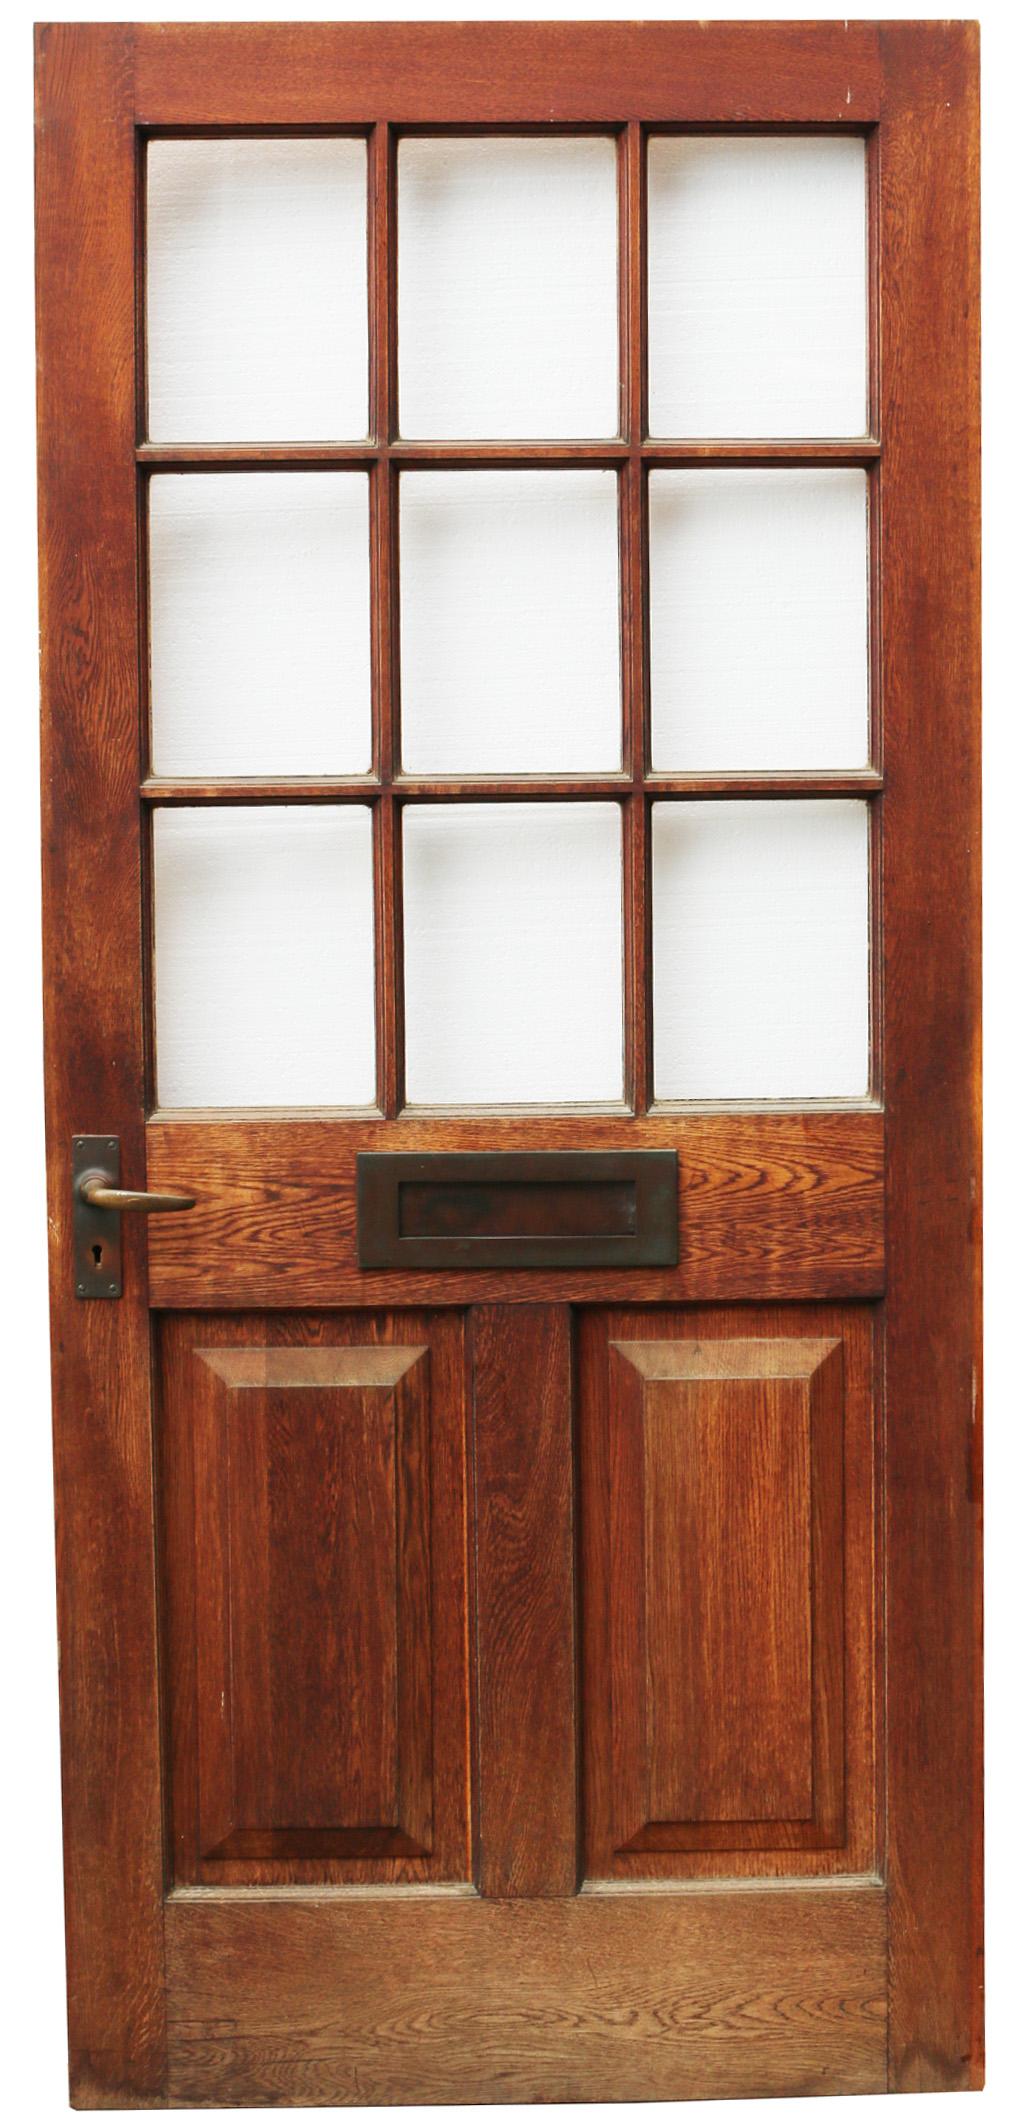 Edwardian Era Oak Exterior Door In Good Condition For Sale In Wormelow, Herefordshire